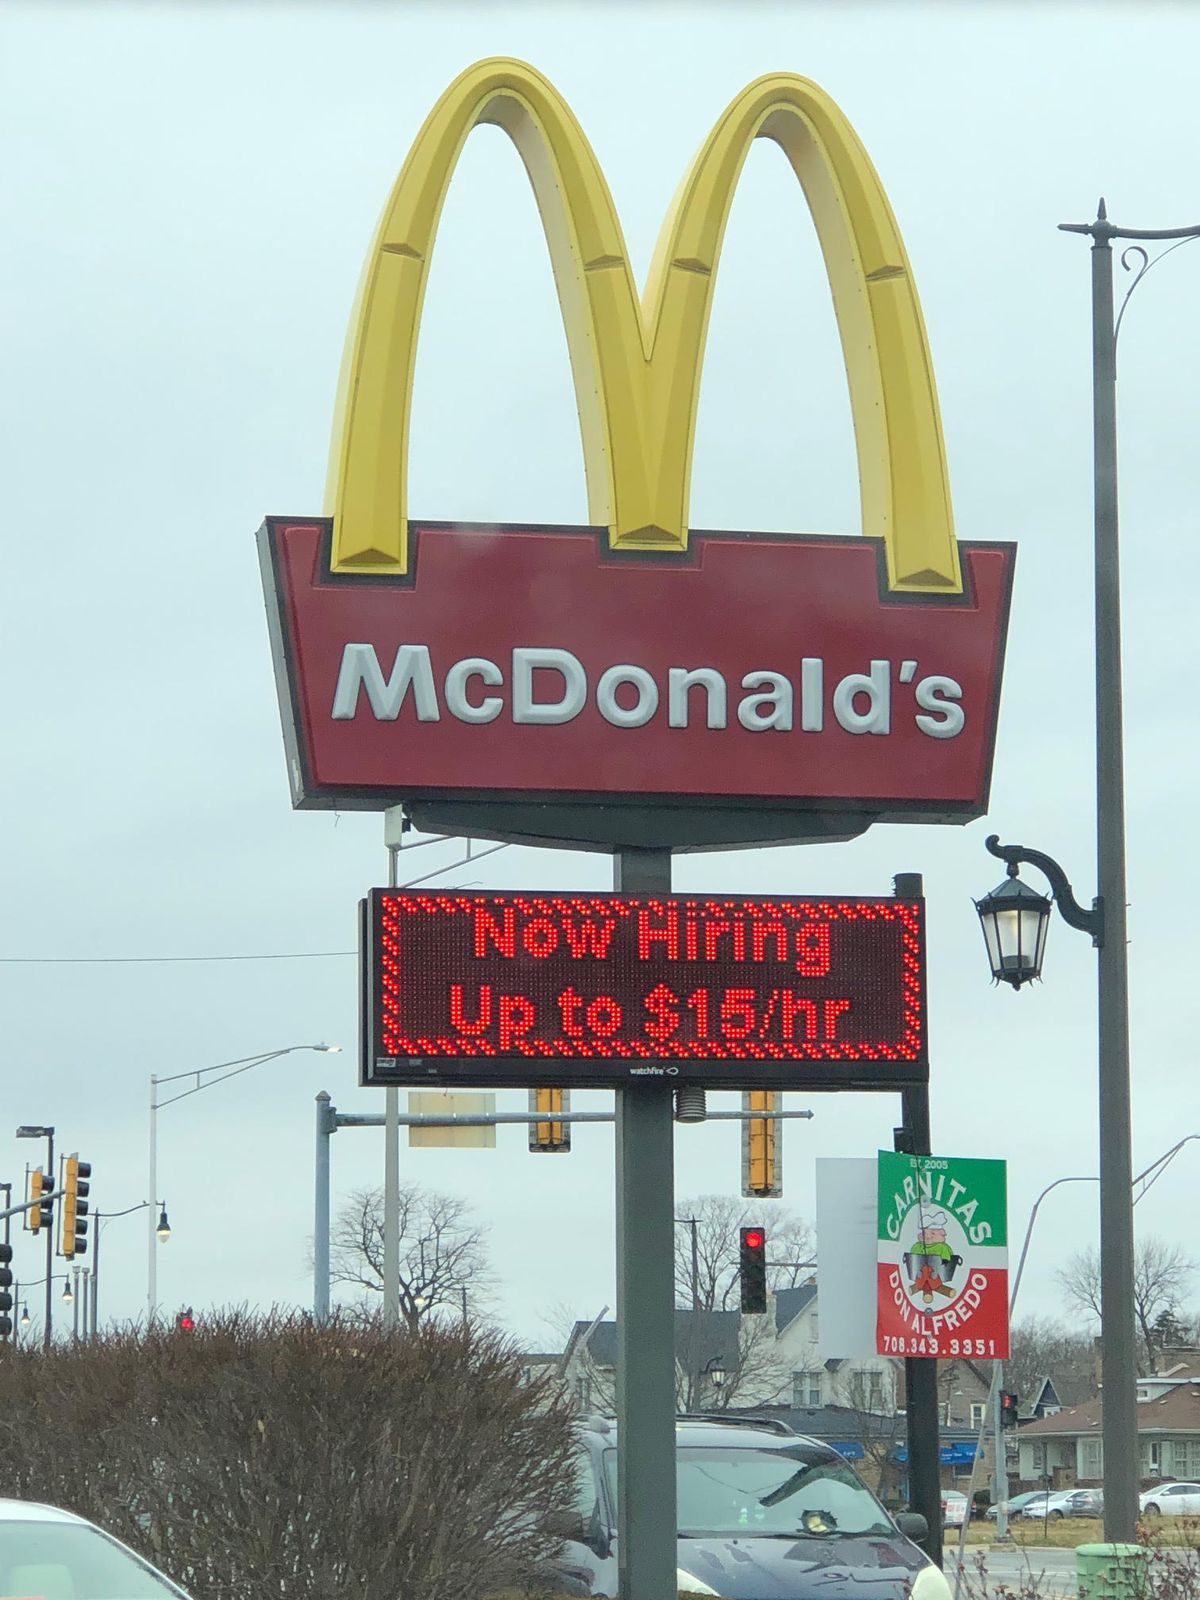 In November, the number of workers quitting jobs in food and hospitality services increased to 920,000, according to the U.S. Bureau of Labor Statistics. “We’re hiring” and “help wanted” signs are popping up at many restaurants, including a McDonald’s in suburban Maywood.